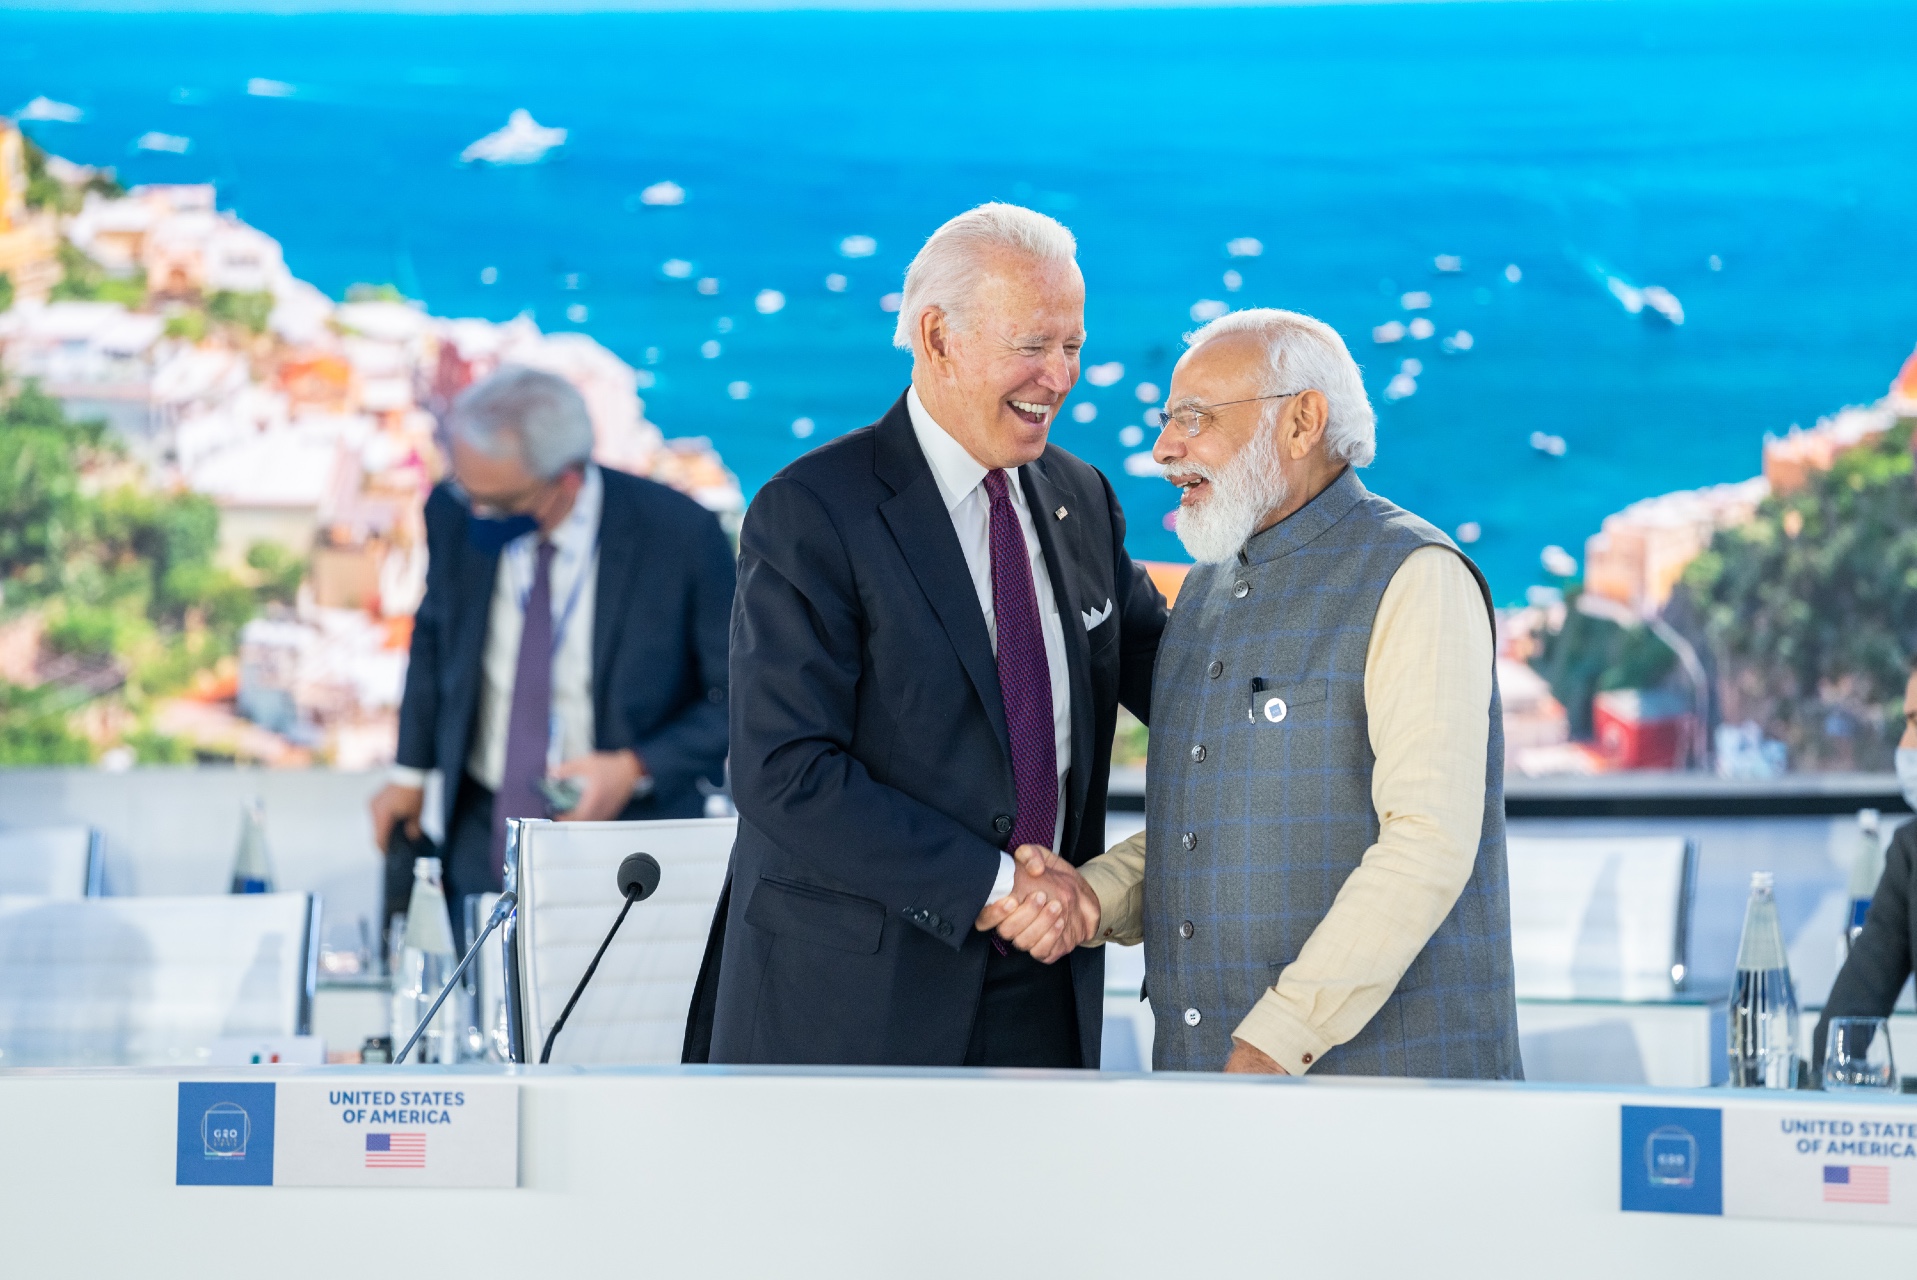 President Joe Biden greets India Prime Minister Narendra Modi at the Global Summit on Supply Chain Resilience